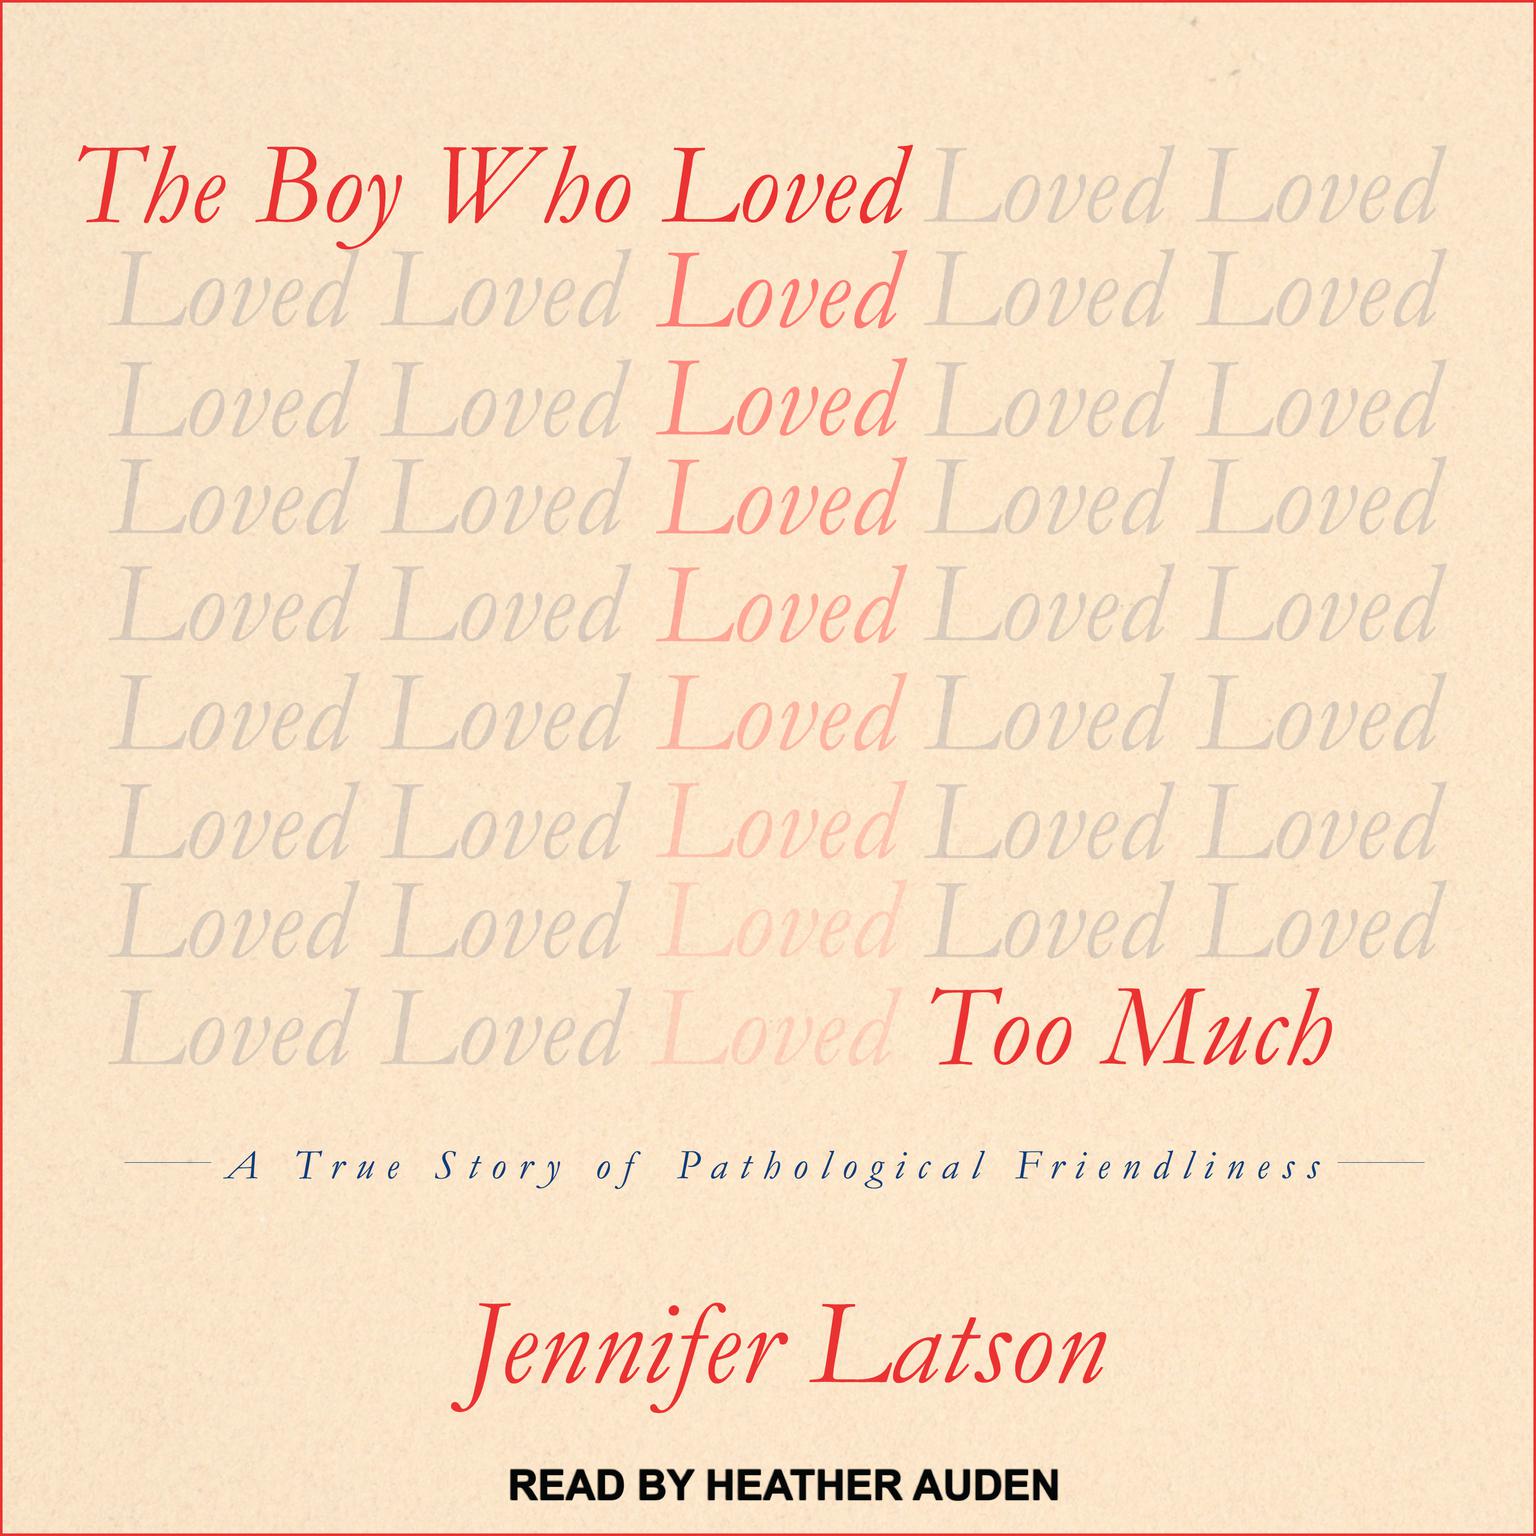 The Boy Who Loved Too Much: A True Story of Pathological Friendliness Audiobook, by Jennifer Latson